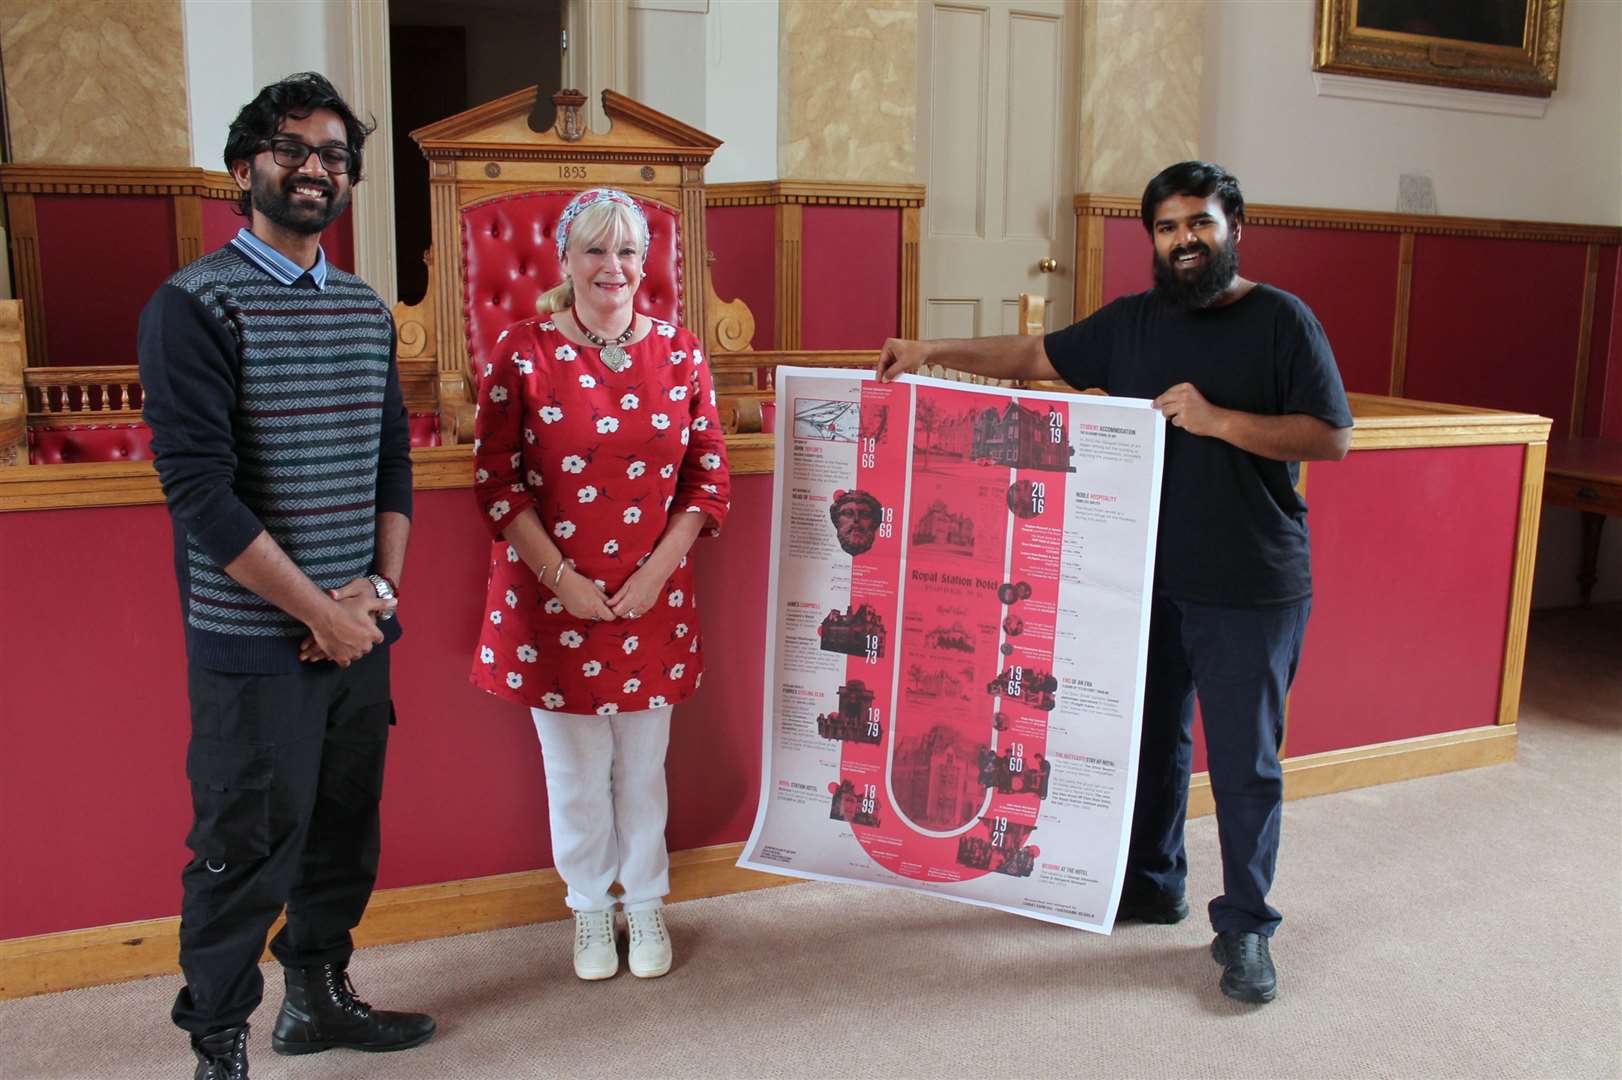 Suraj, Carole, and Shashank at the Courtroom in the Tolbooth with a copy of the Royal Hotel history.